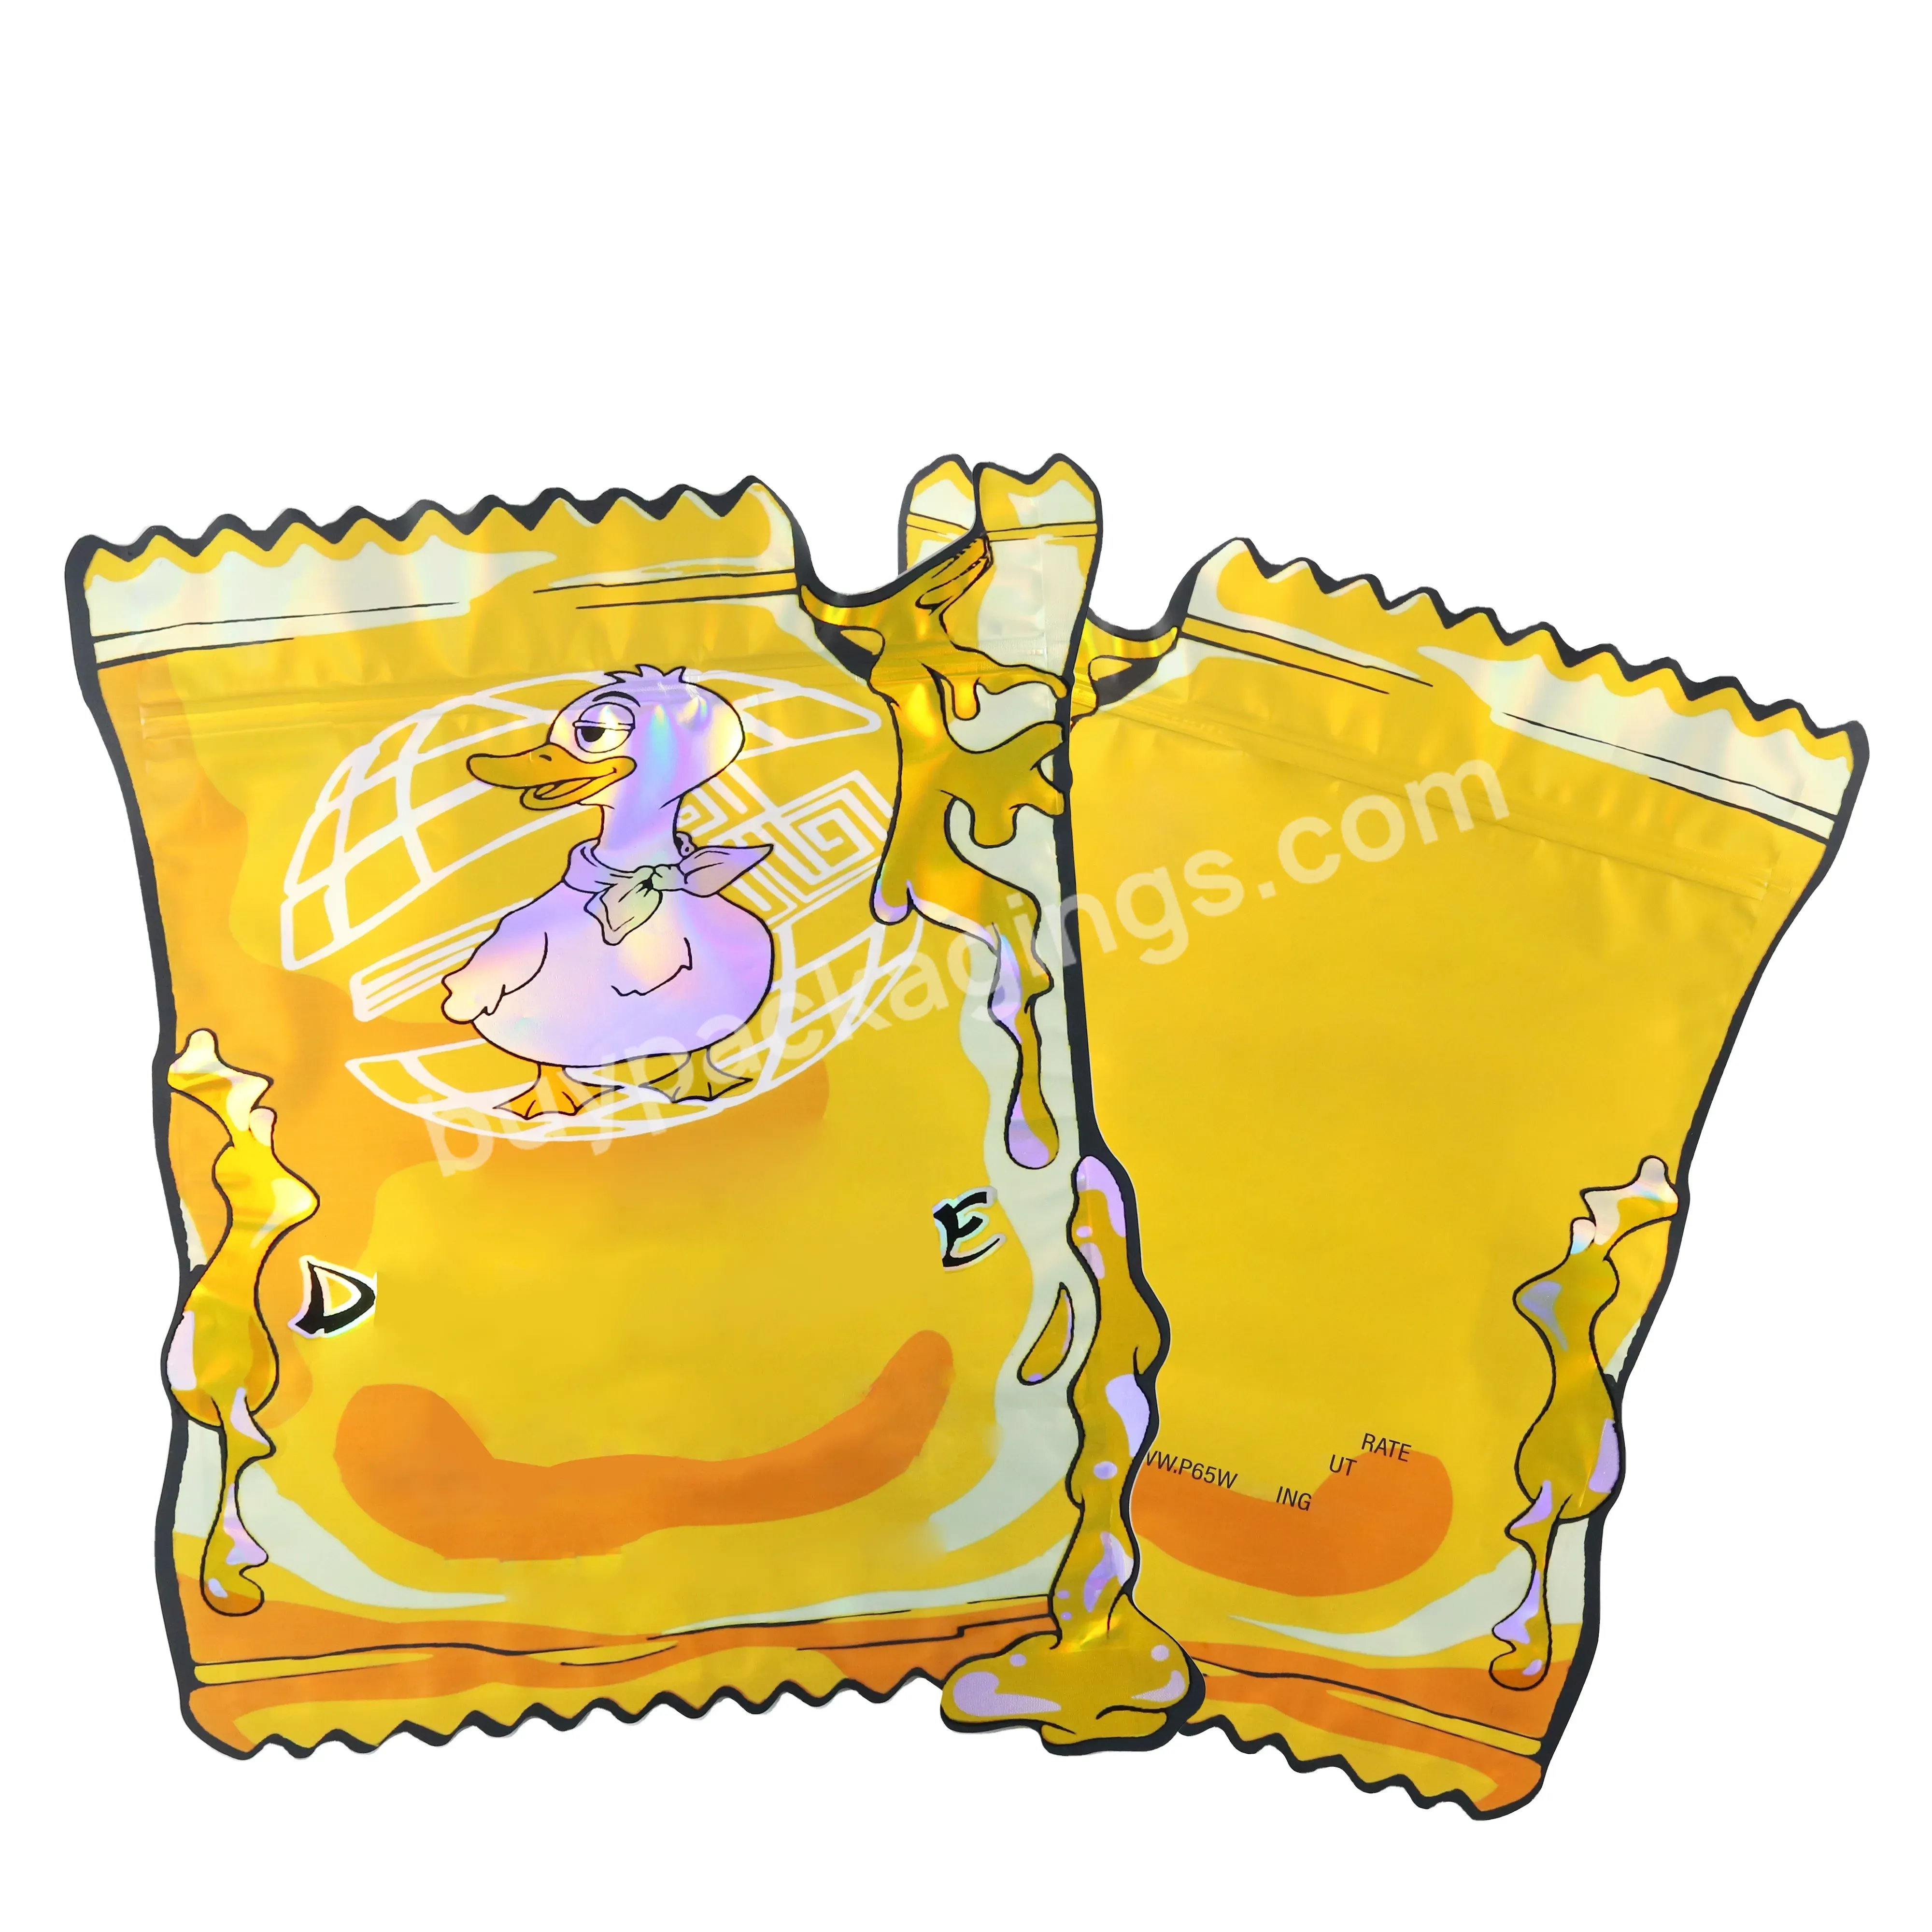 Mylar Bags Custom Printed Smell Proof Zip Lock Bag Stand Up Pouch Die Cut Holographic Mylar Bag 3.5g - Buy Mylar Bag 3.5g,Die Cut,Smell Proof Zip Lock Bag.